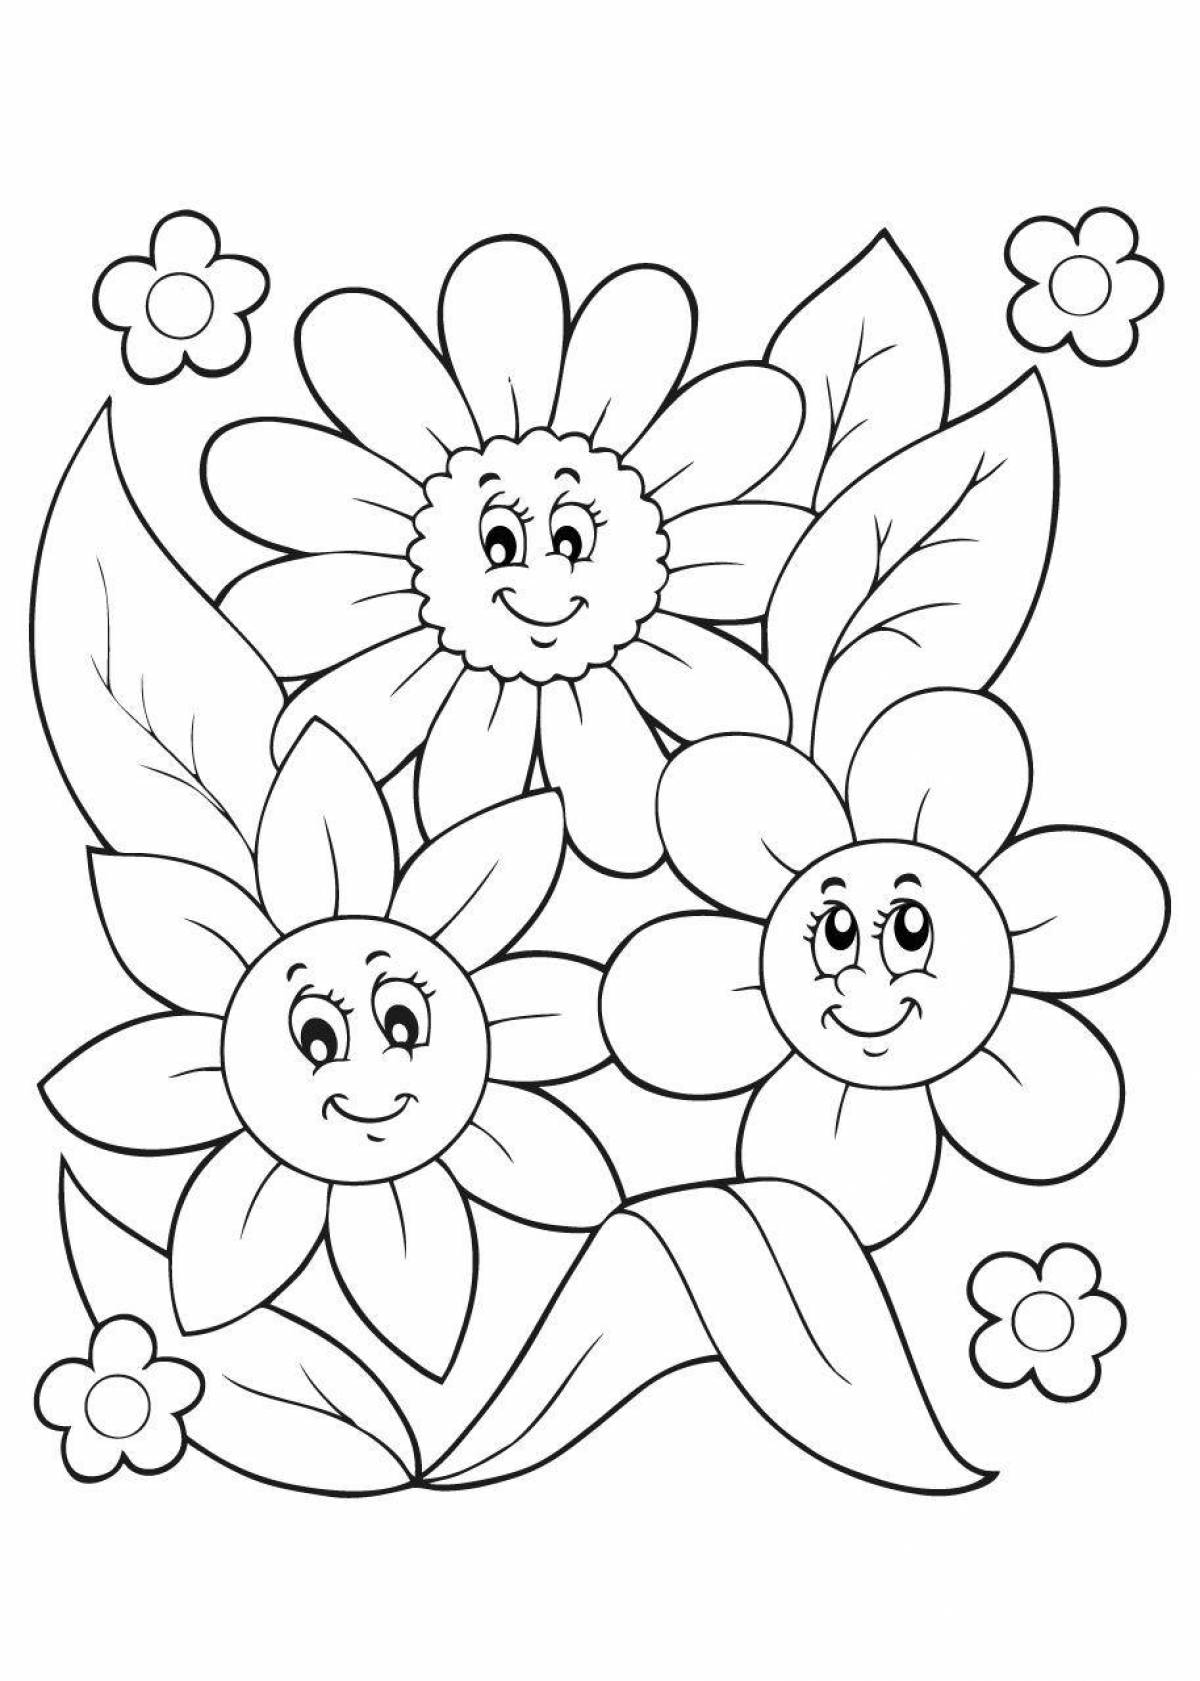 Exotic flowers coloring pages for children 4-5 years old